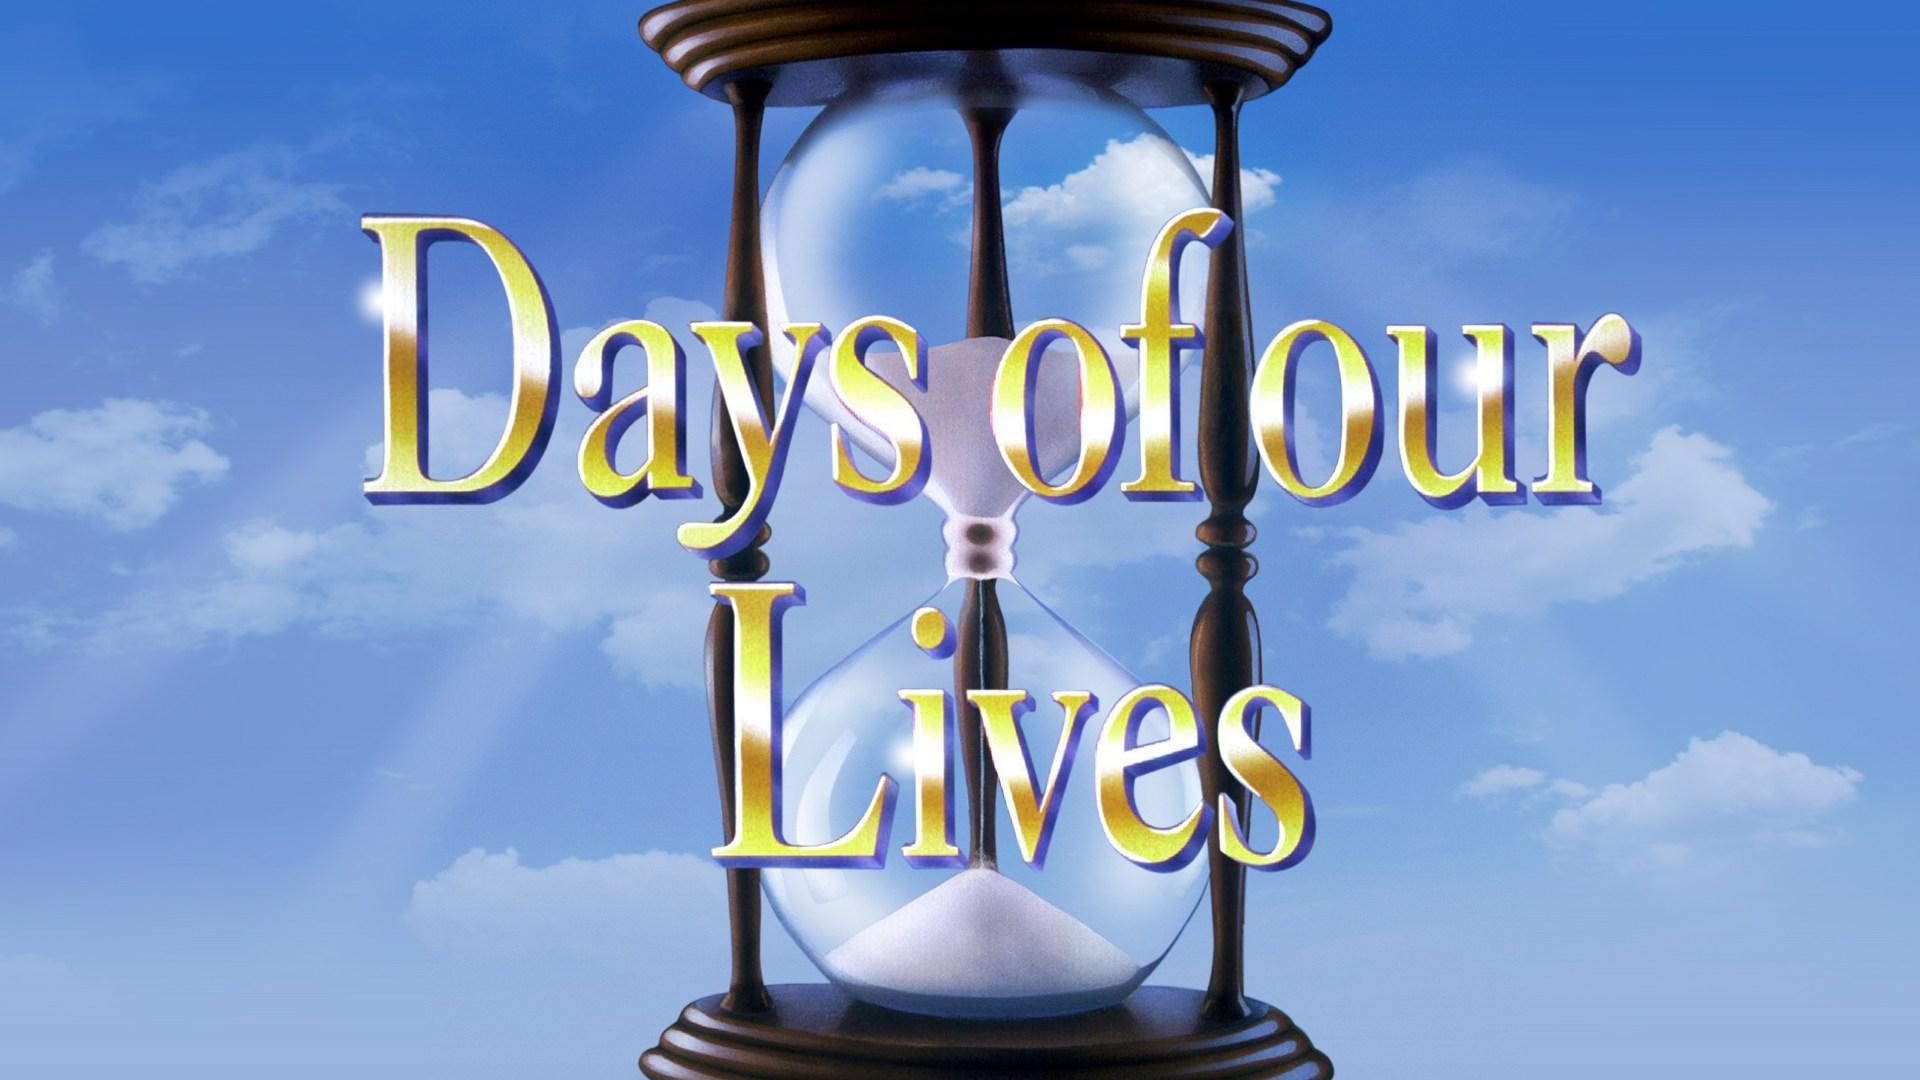 Report: Cast of 'Days of our Lives' released from contracts